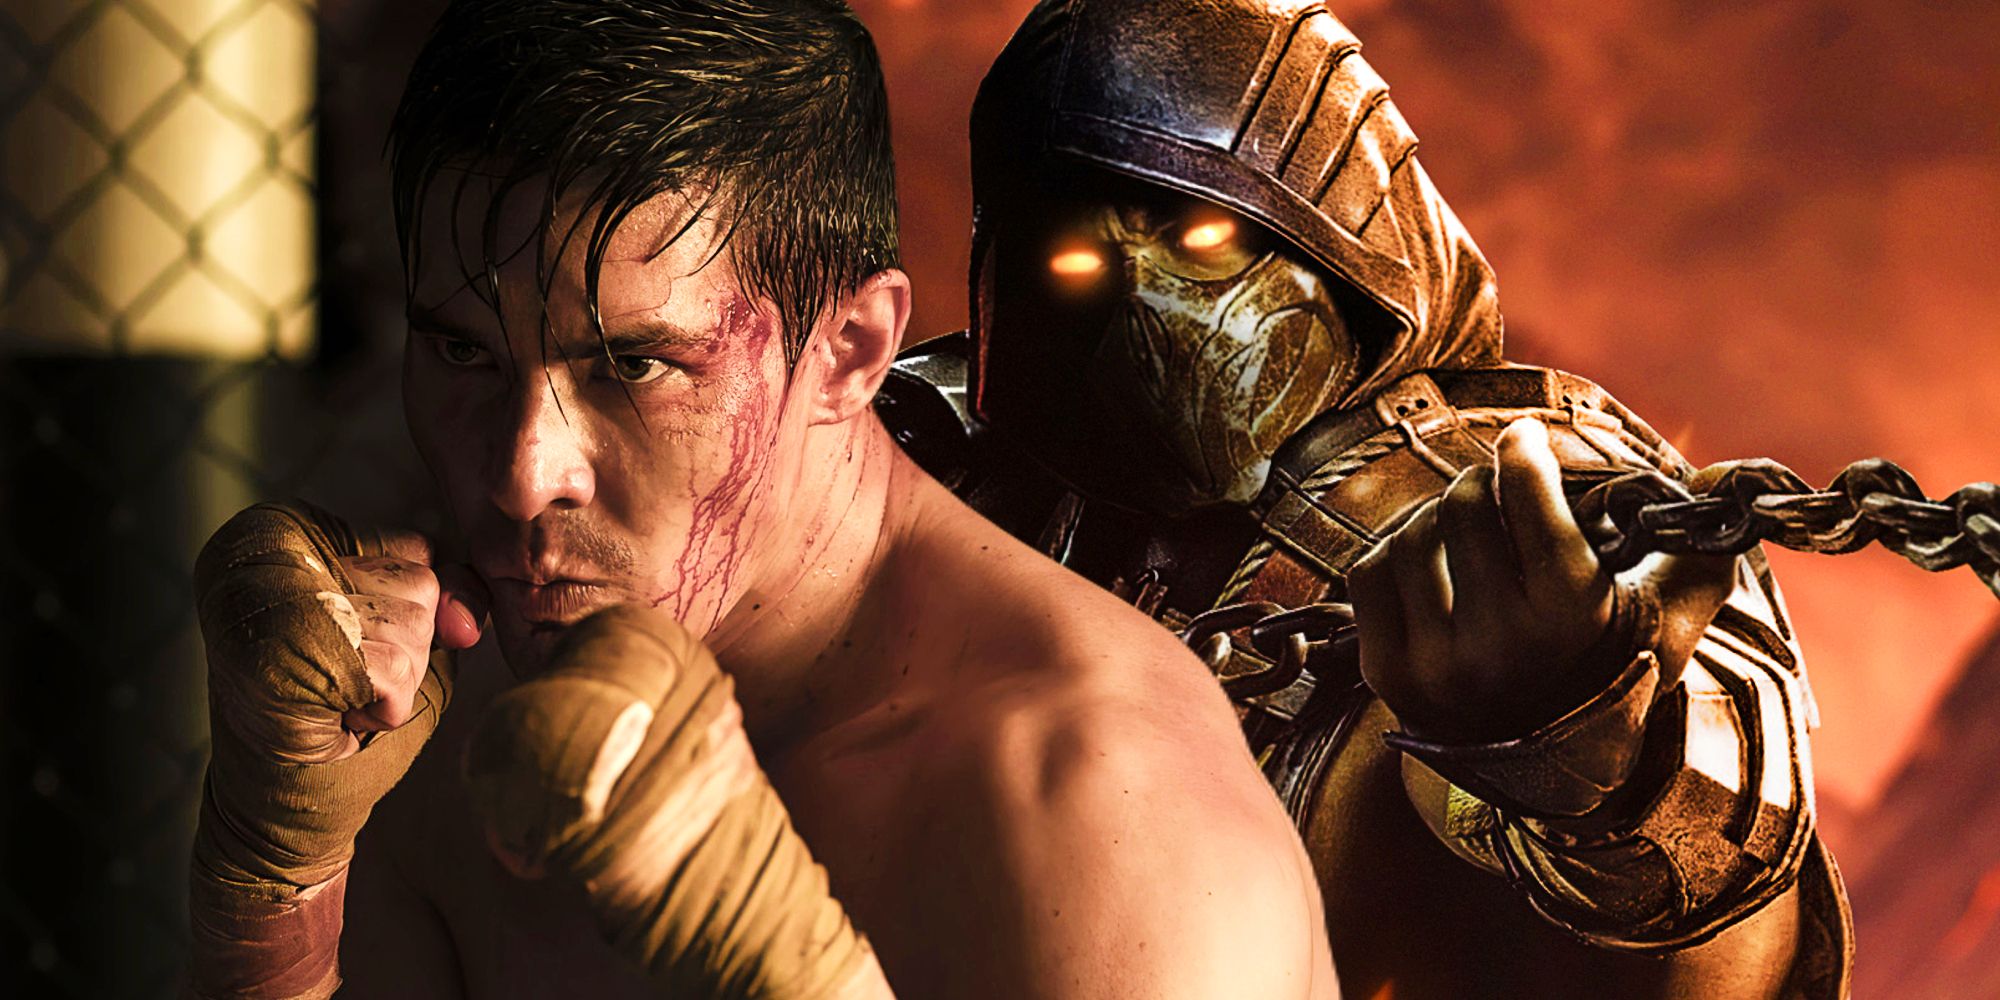 Cole Young in Mortal Kombat (2021) and Scorpion in the Mortal Kombat games